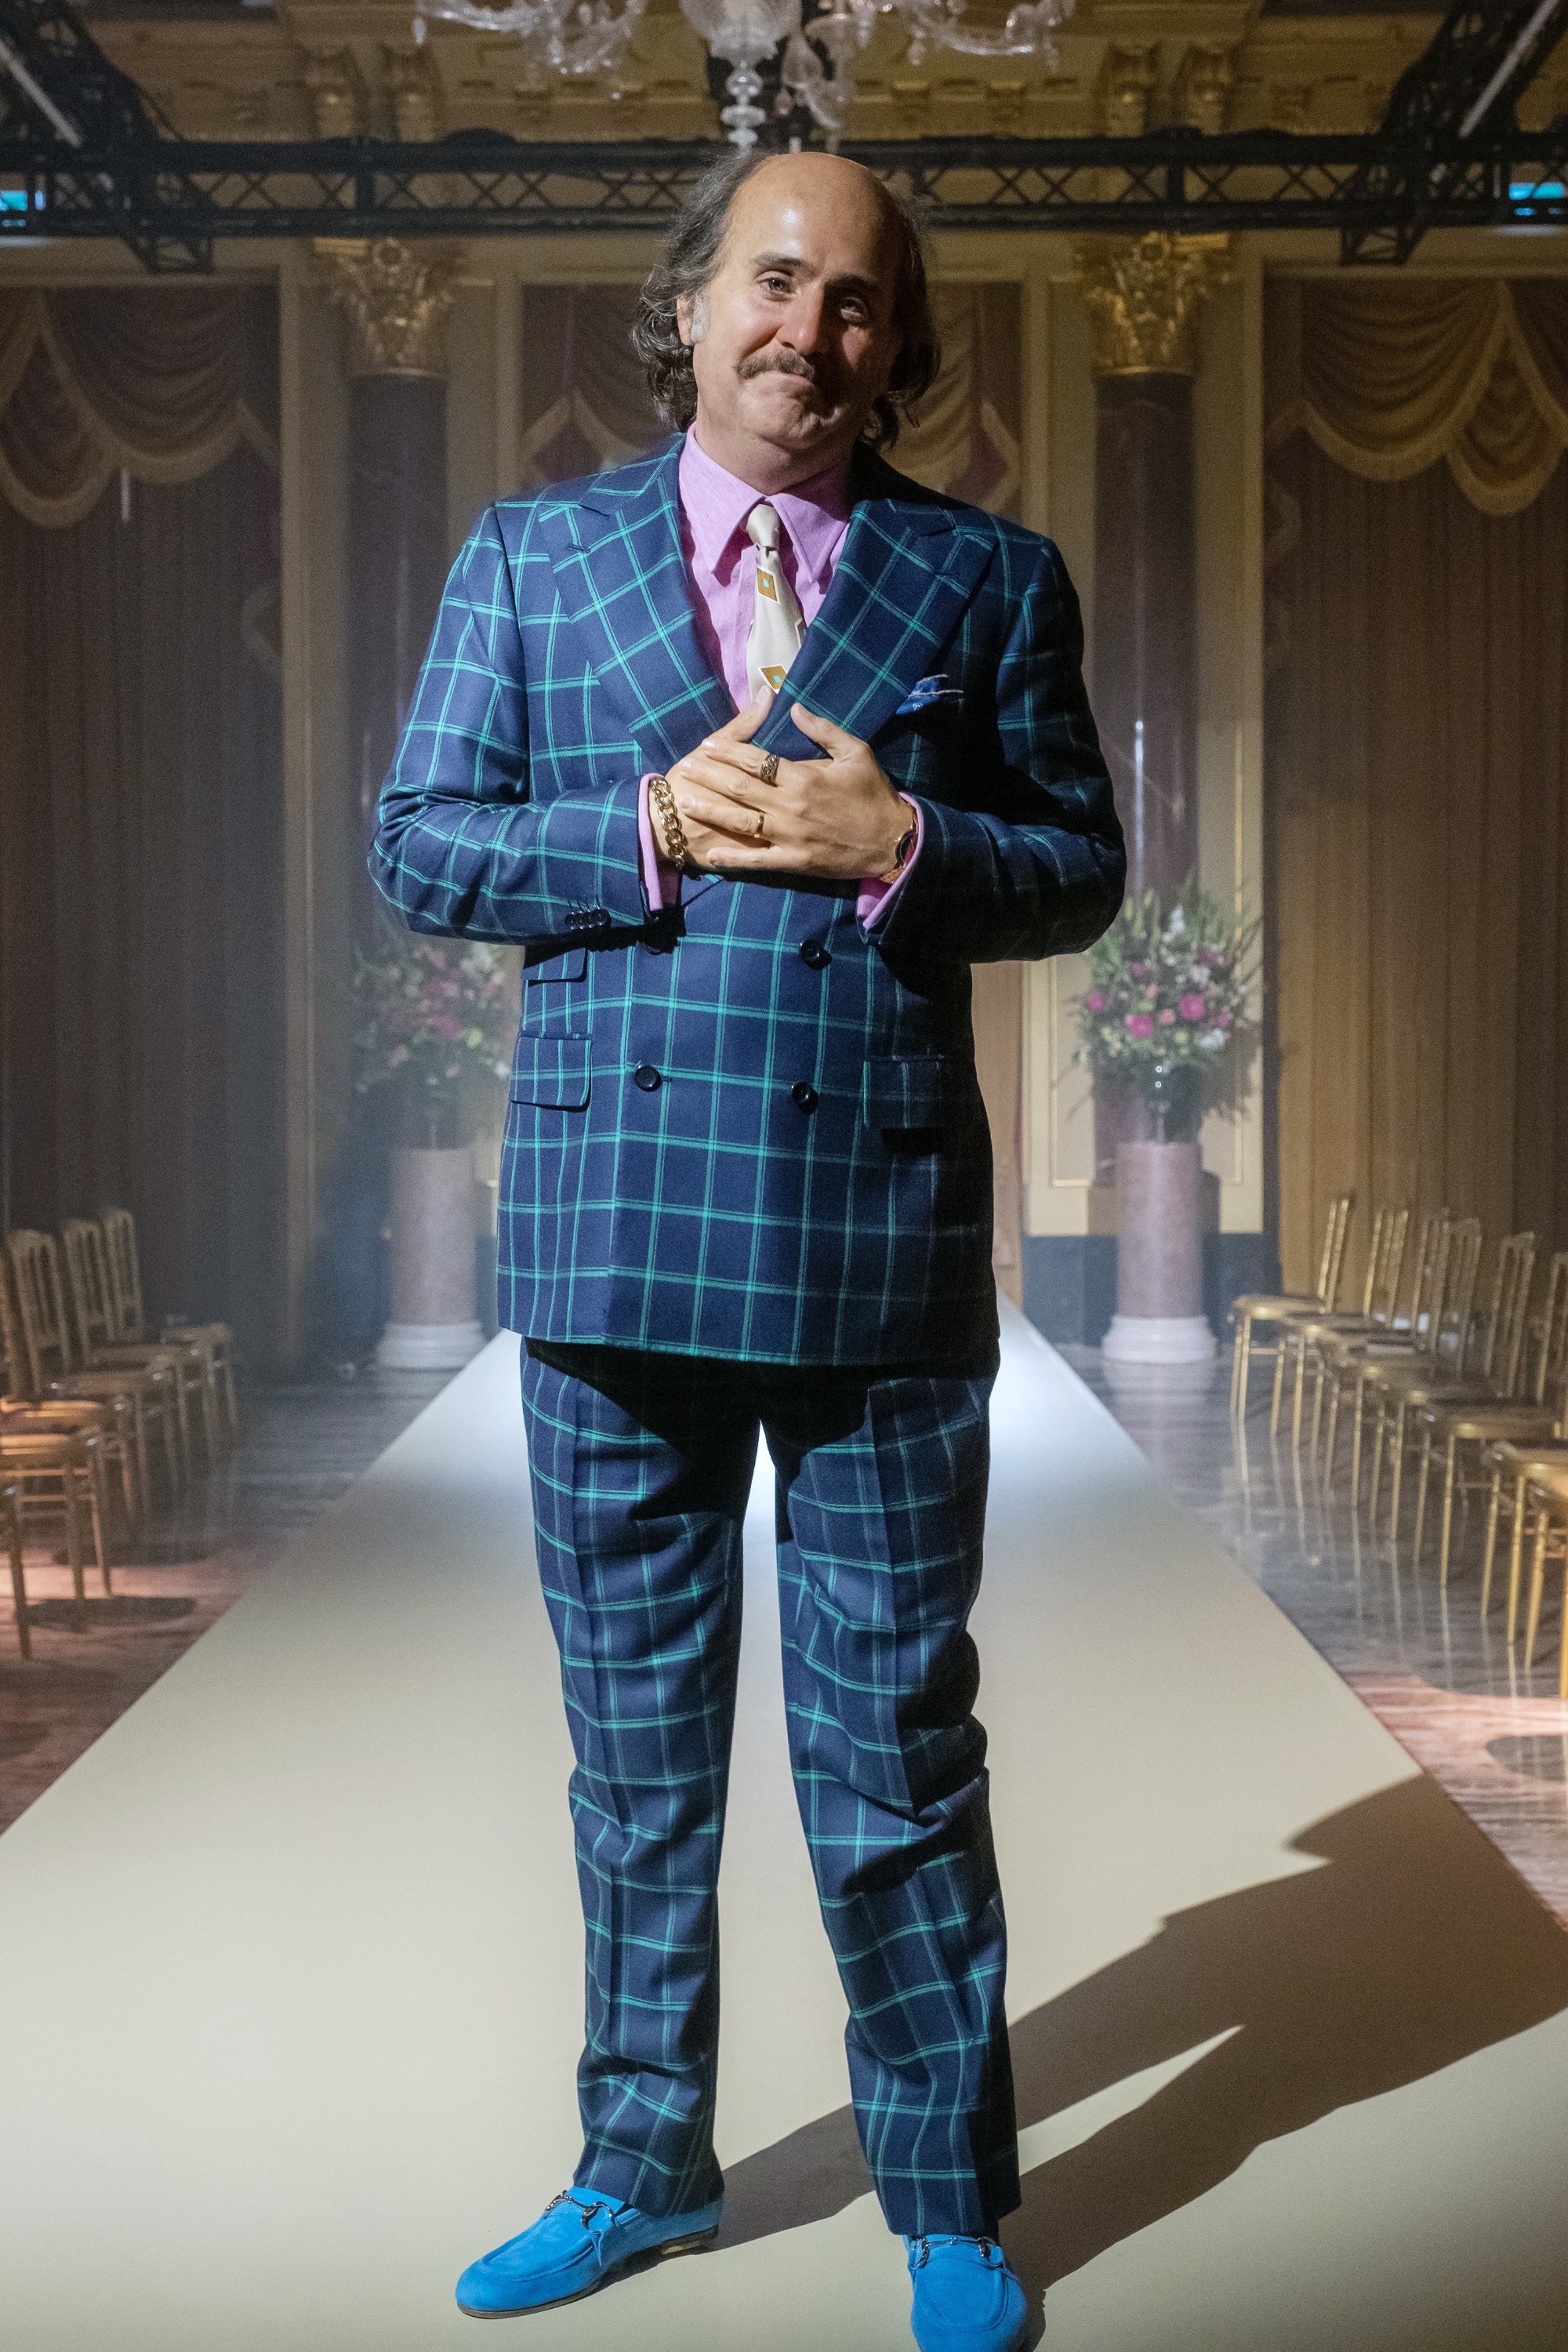 Leto as Paolo Gucci in a promotional photo